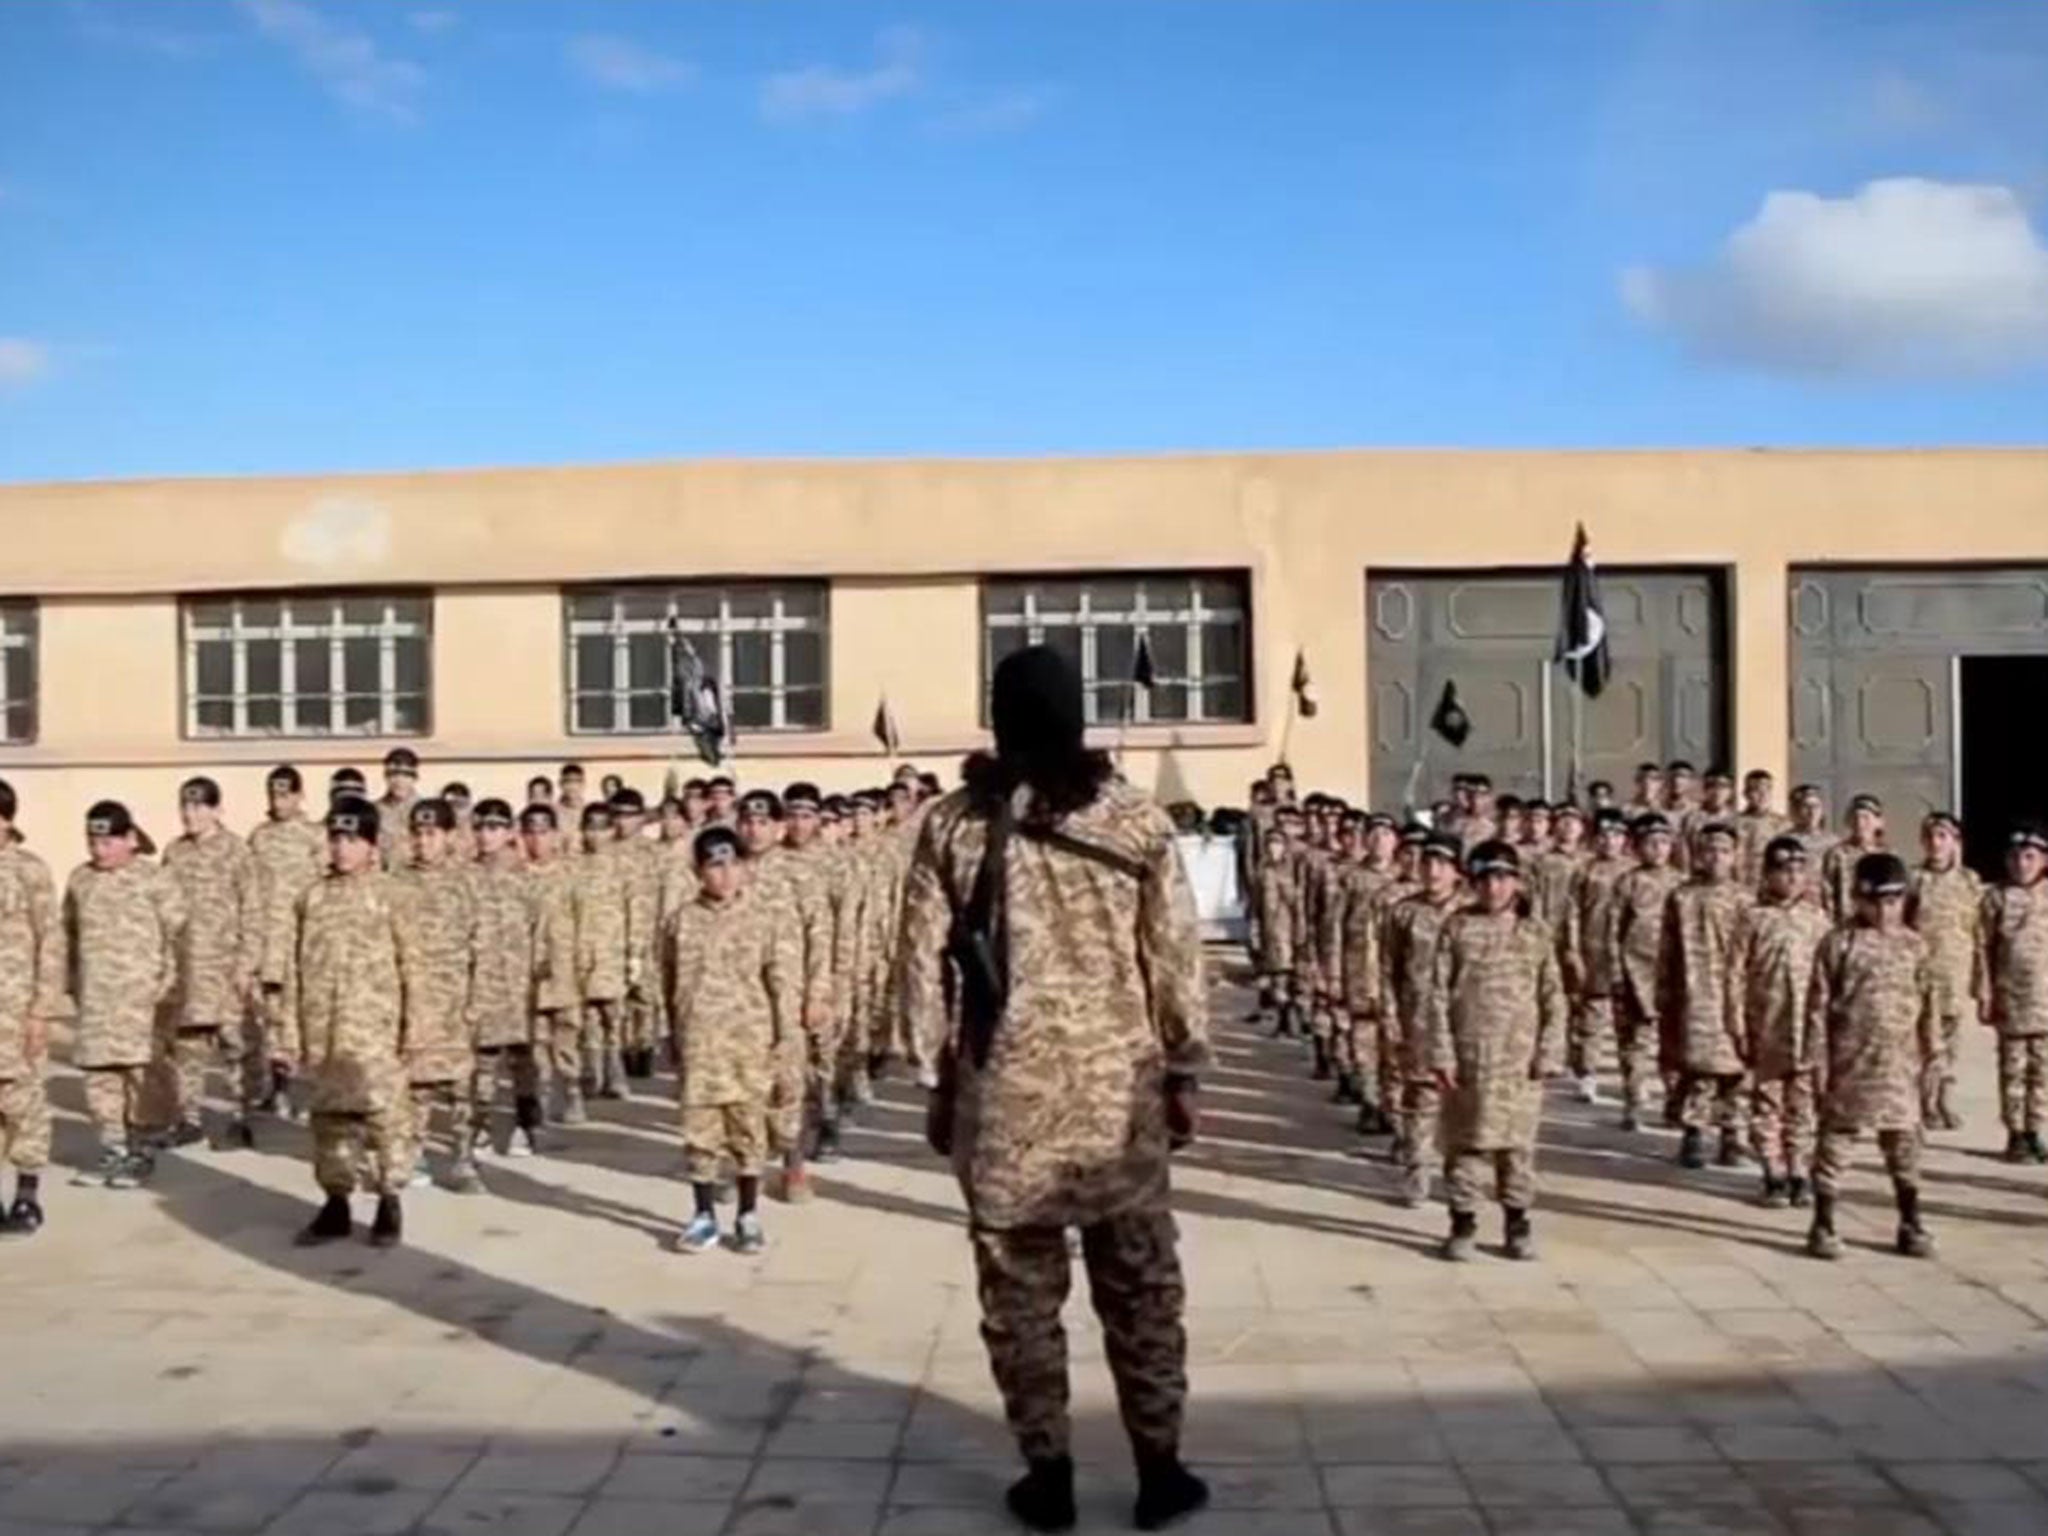 Isis has been quick to seize control of the education system in Syria and Iraq in a bid to prepare a new, stronger second generation mujahedeen who are conditioned to extreme values from birth